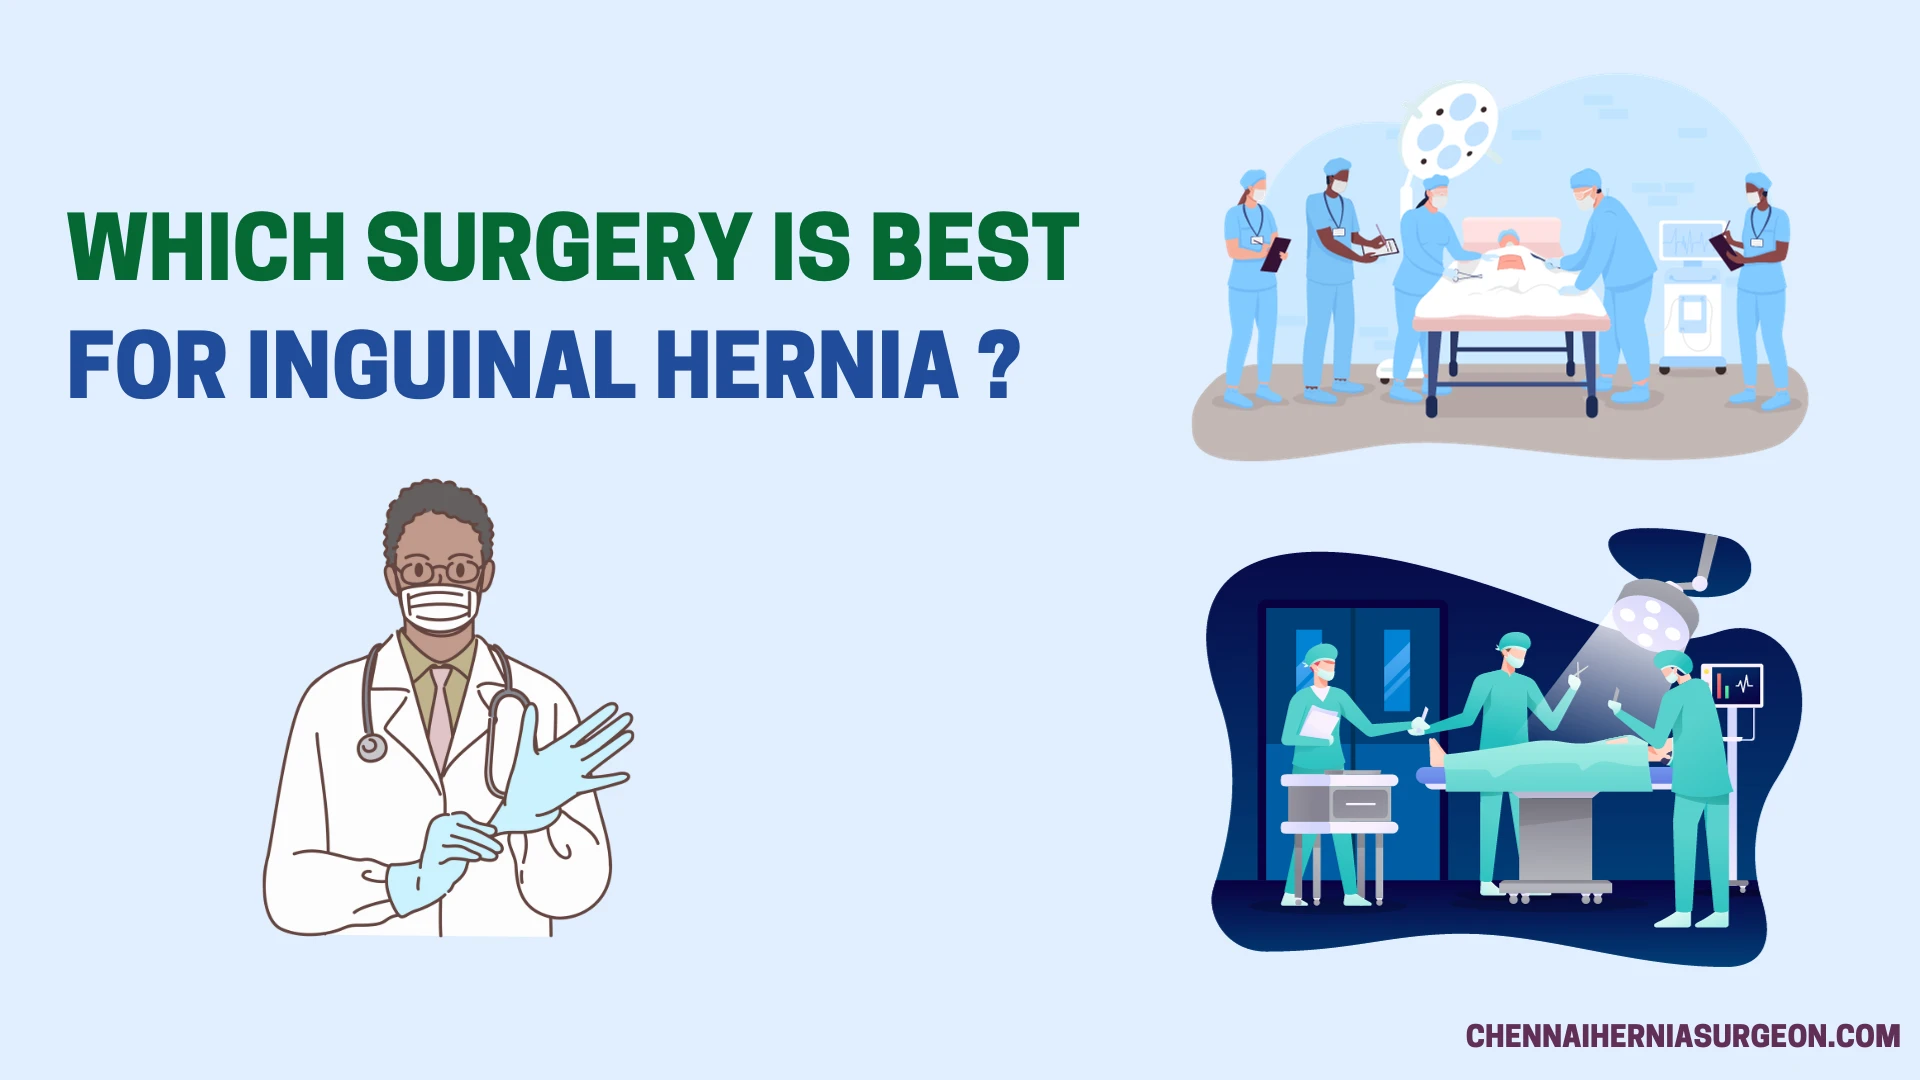 Which surgery is best for inguinal hernia